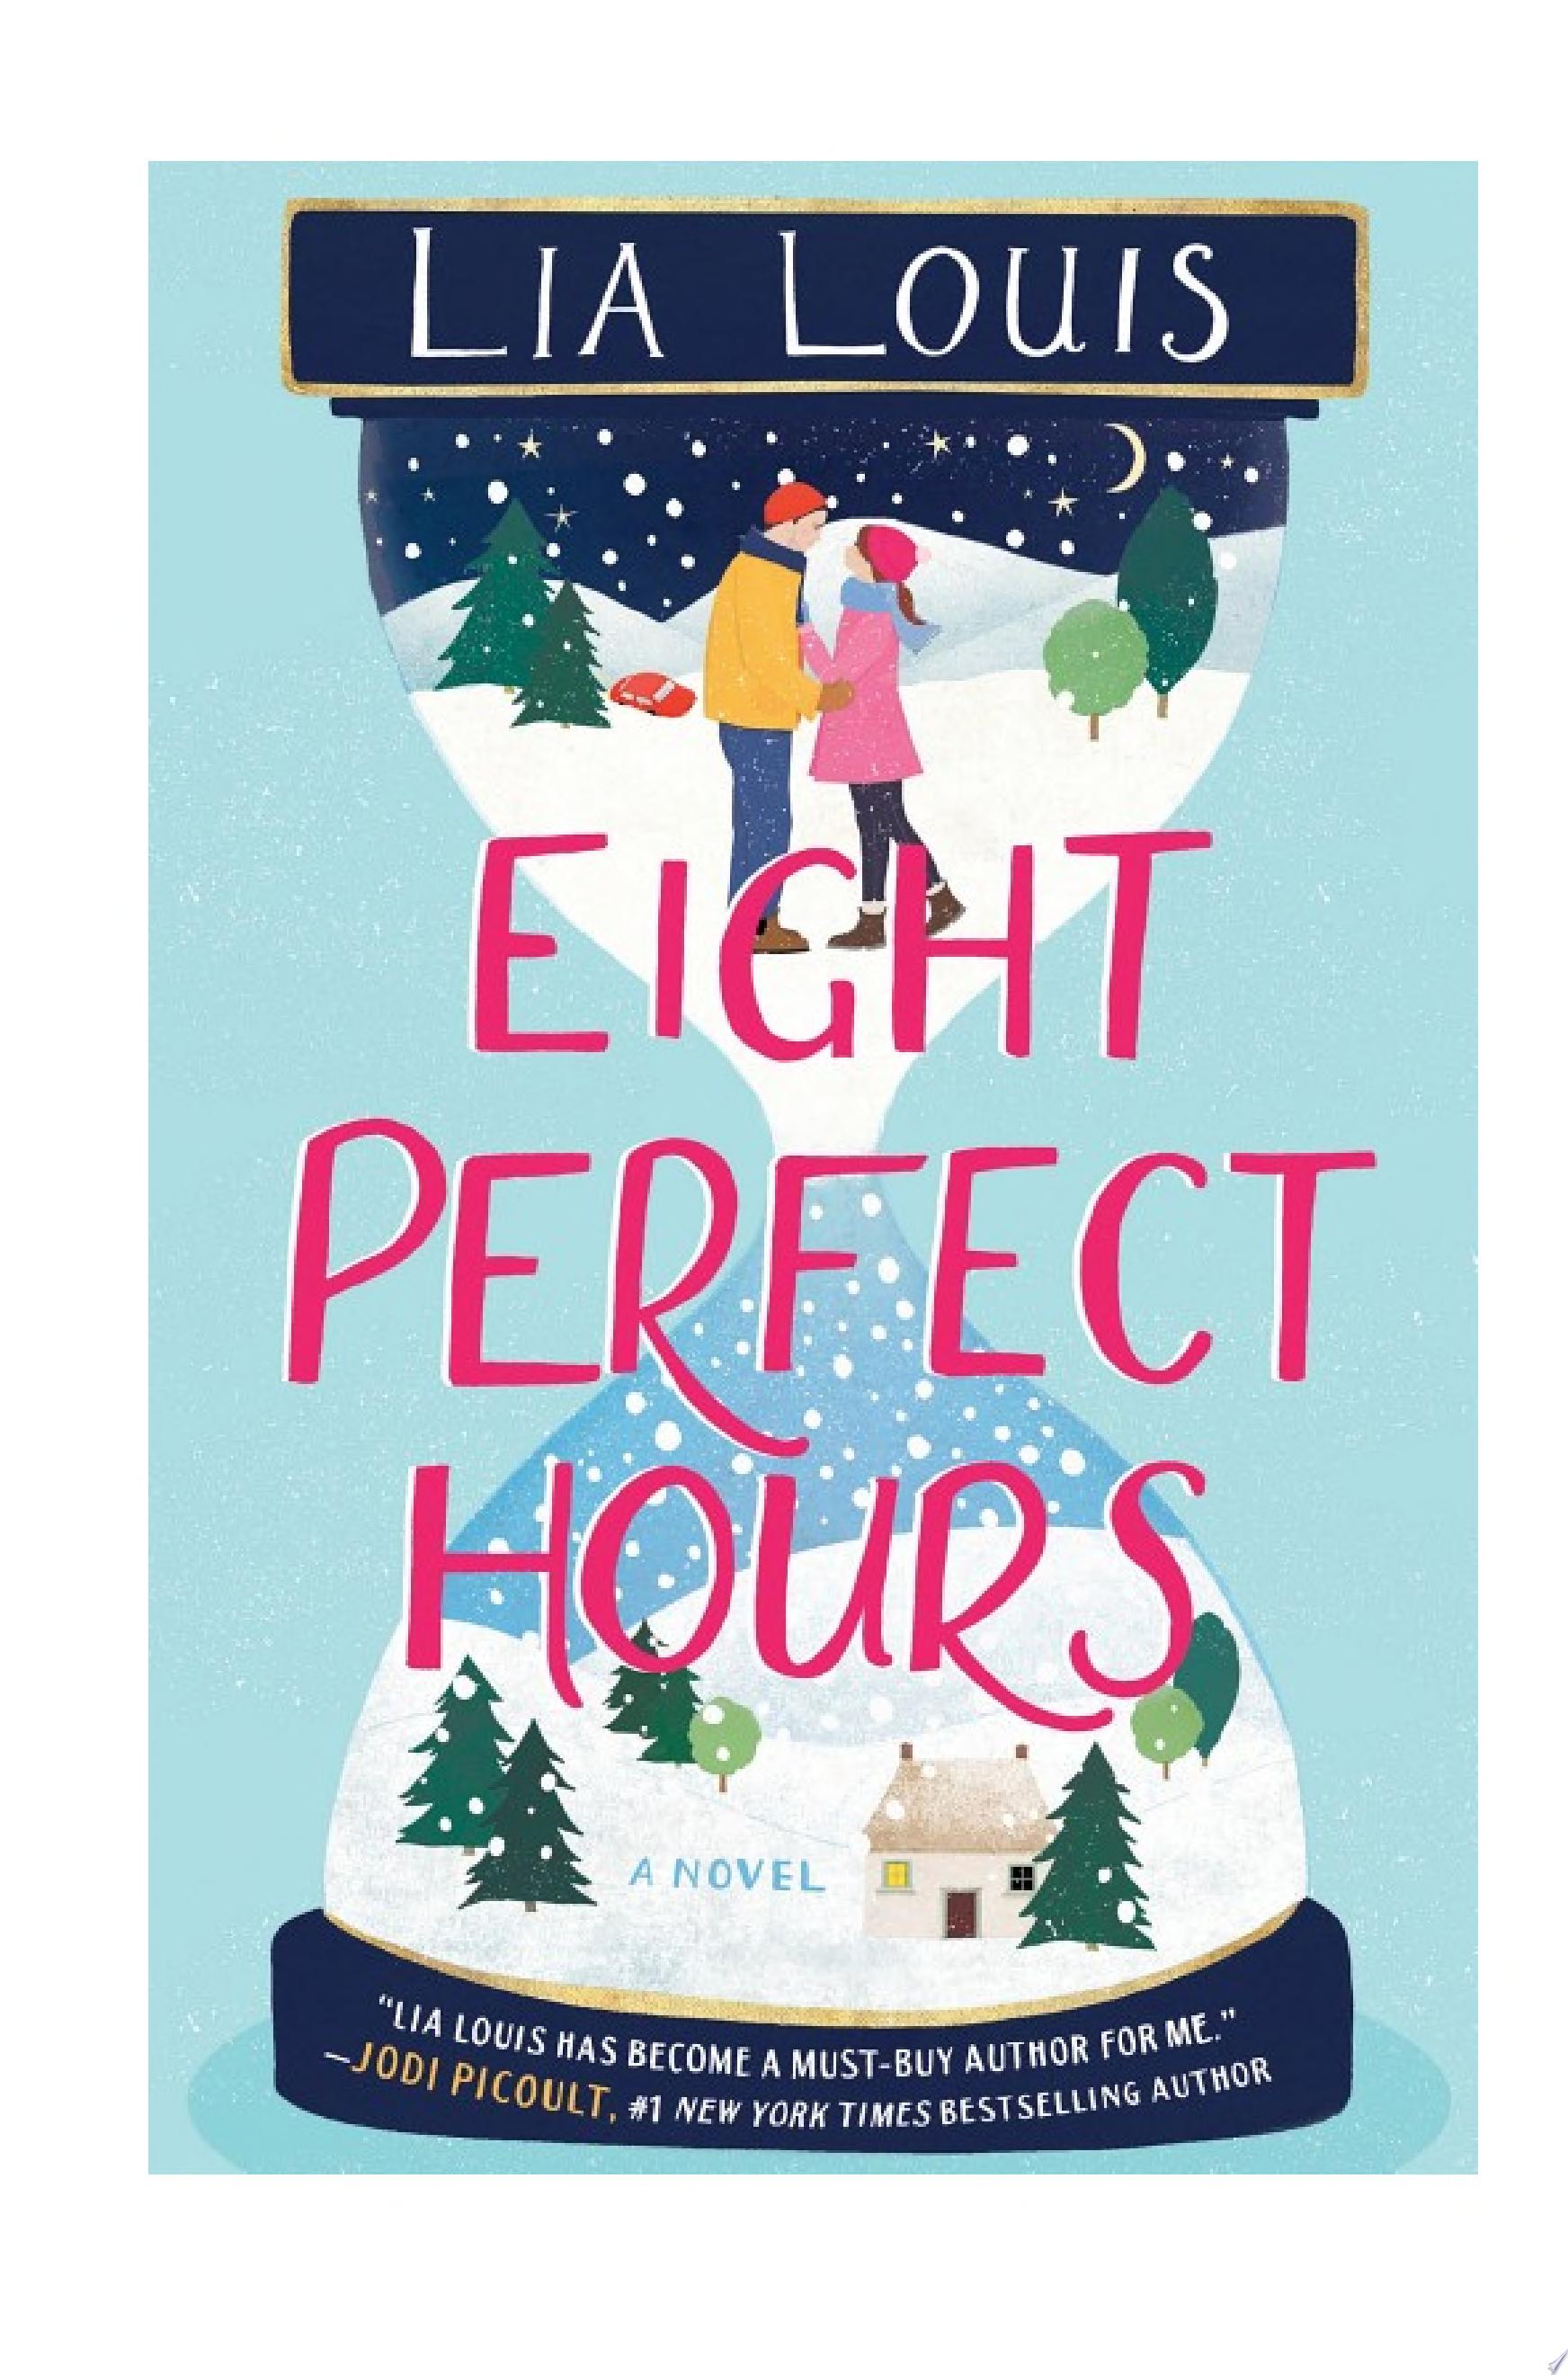 Image for "Eight Perfect Hours"